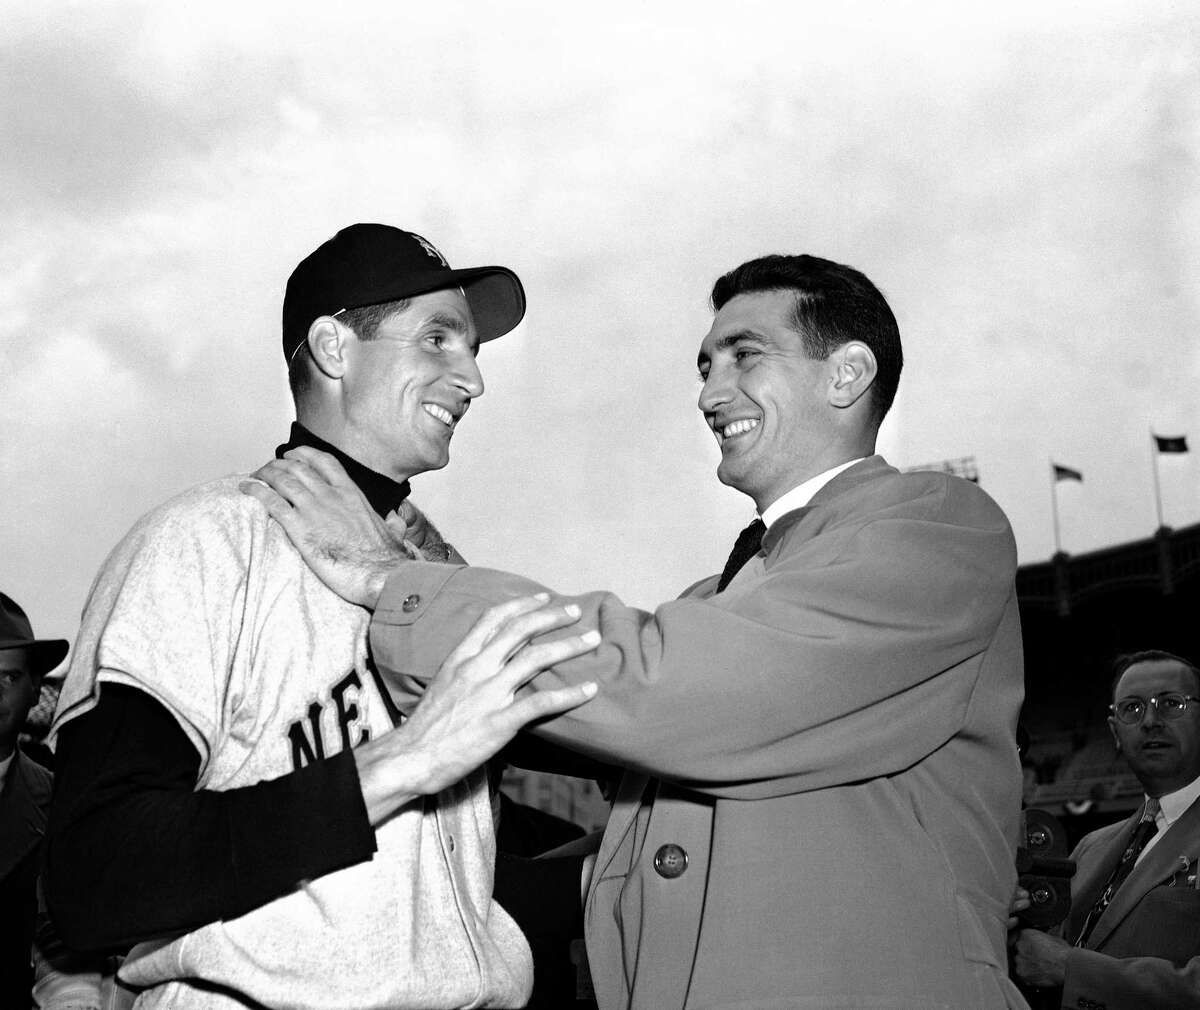 In this file photo, Bobby Thomson, left, of the New York Giants, and Ralph Branca of the Brooklyn Dodgers, engage in horse play before a World Series game at Yankee Stadium in New York. Branca, the Brooklyn Dodgers pitcher who gave up the home run dubbed the “Shot Heard ‘Round the World,” has died at the age of 90. His son-in-law Bobby Valentine, a former major league manager, says Branca died Wednesday at a nursing home in Rye, New York.